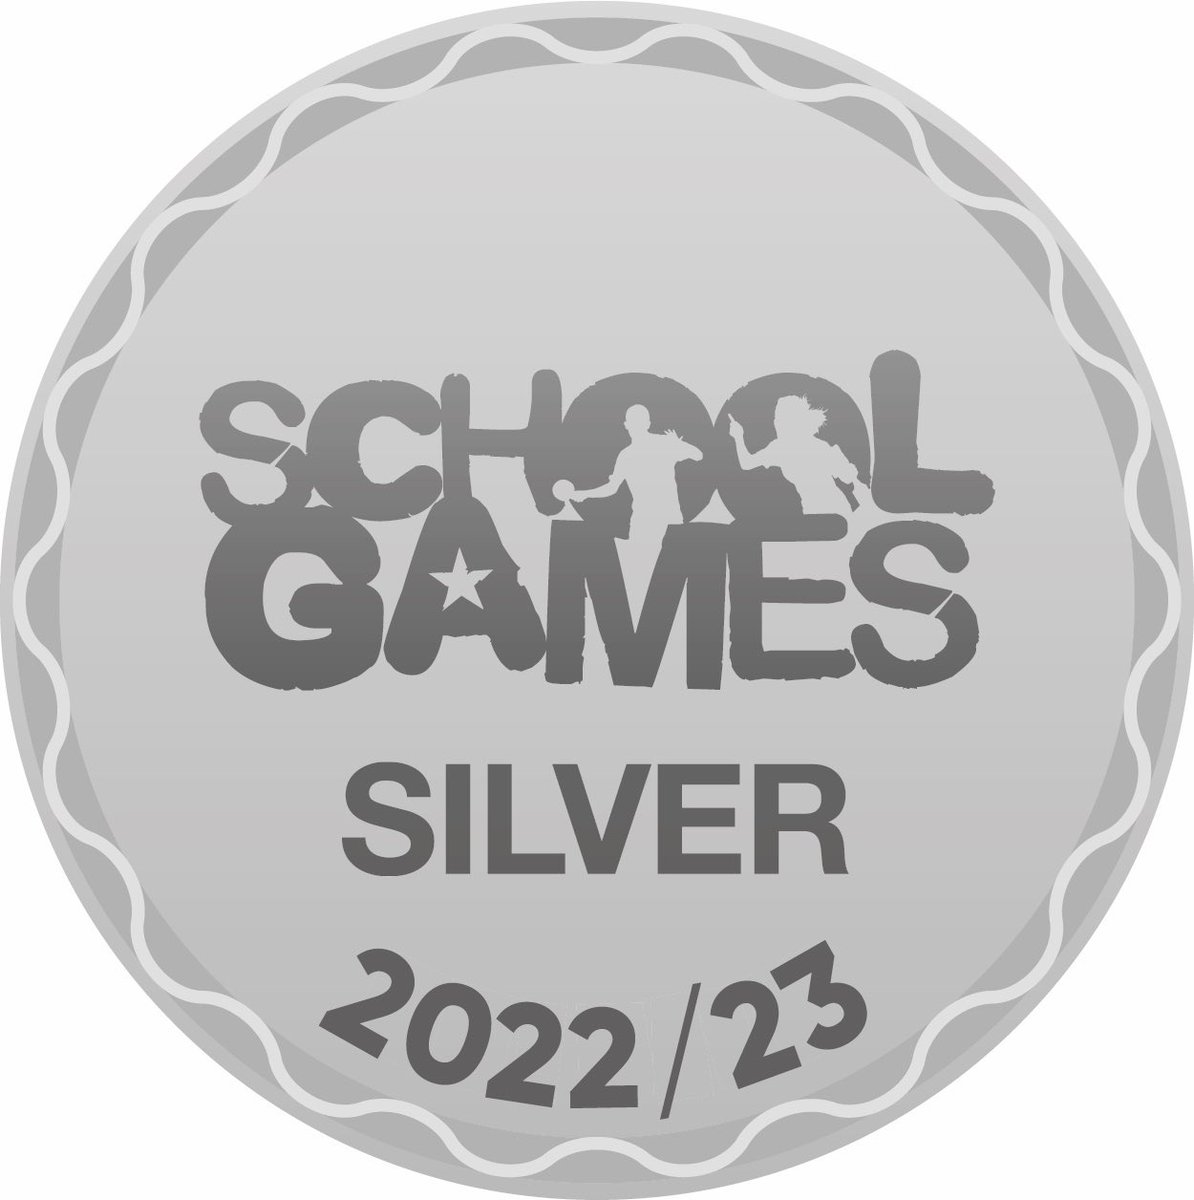 Well done to @SportsStGeorges achieving SILVER @YourSchoolGames award- great achievement 👏👏